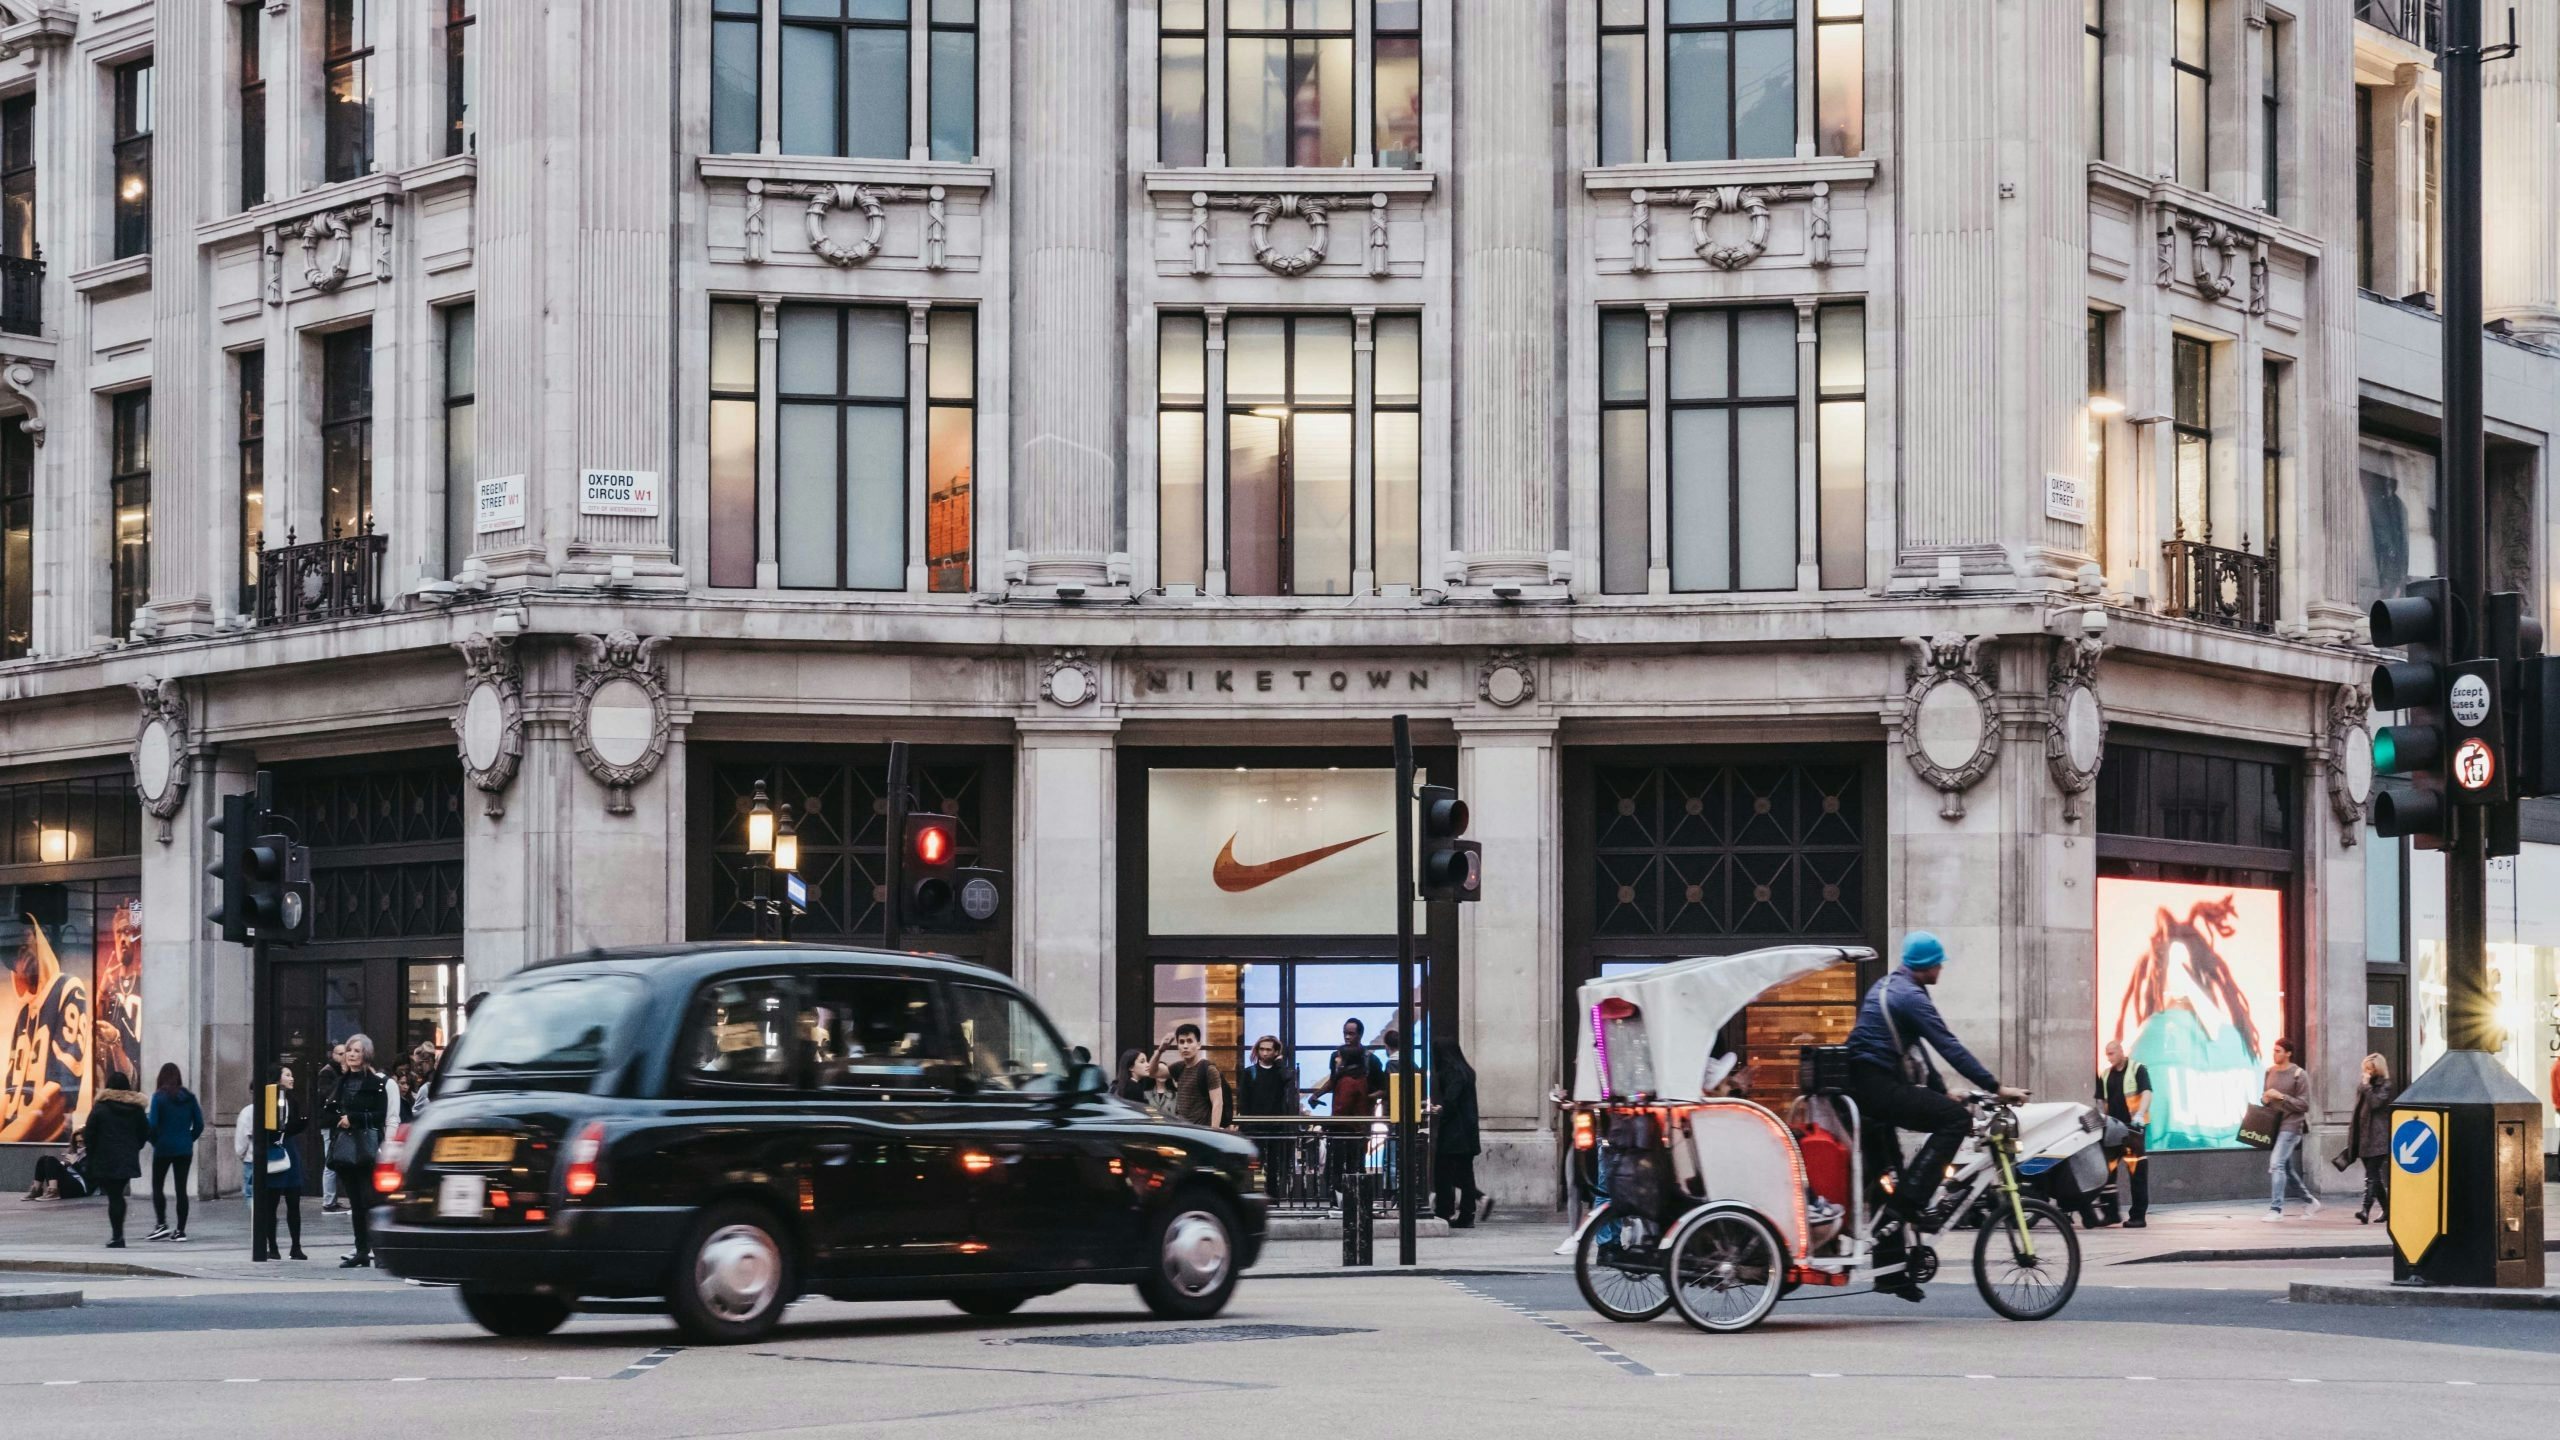 Changes to the UK’s VAT-free policy have sent the industry into a tailspin — and will make London less attractive for Chinese tourists when they return. Photo: Shutterstock